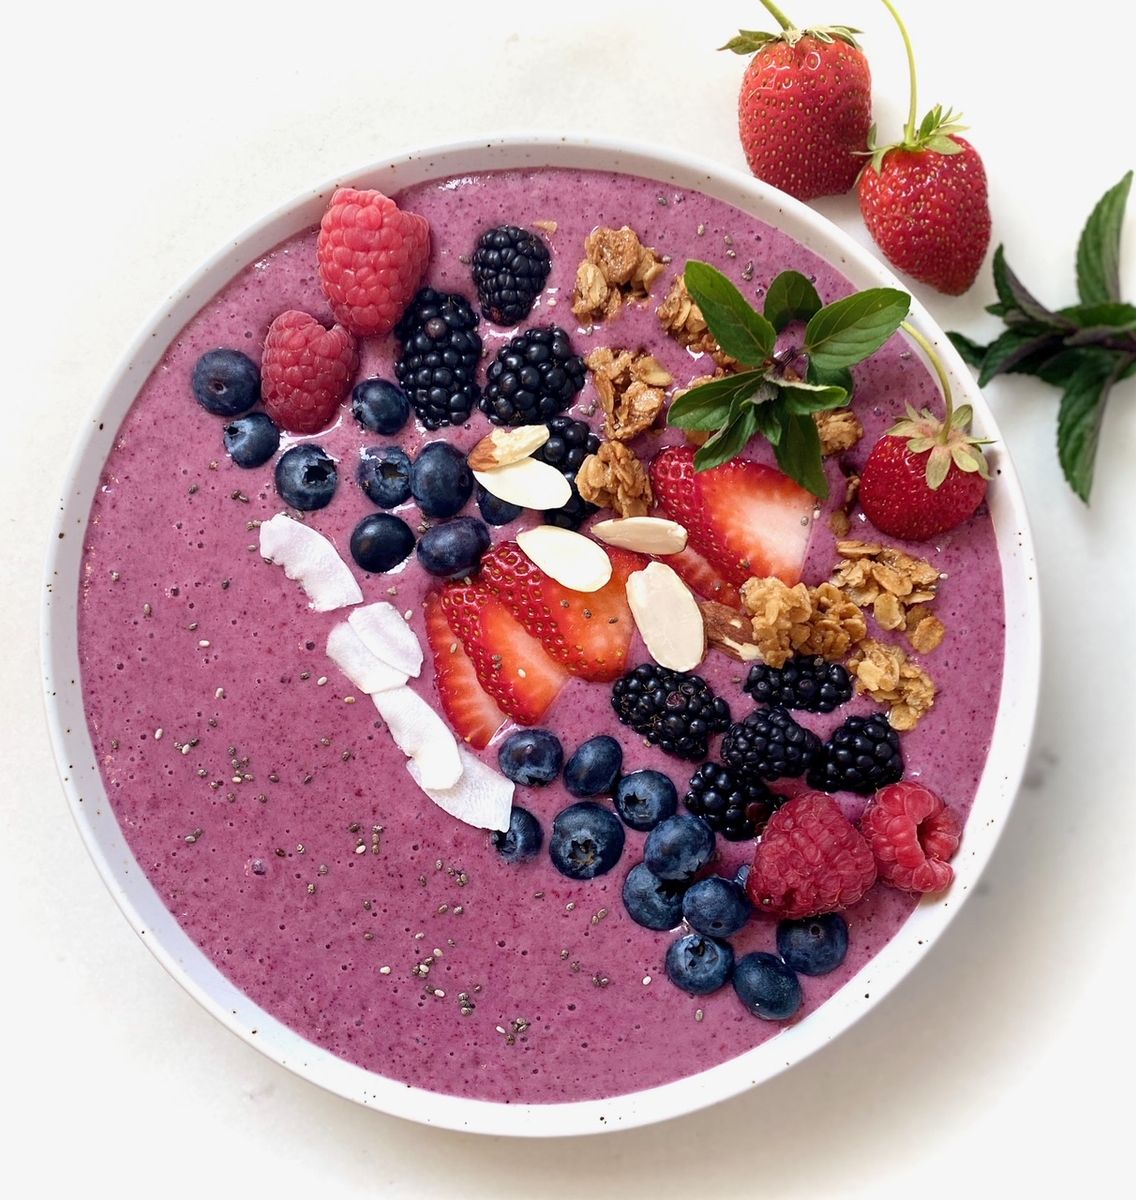 Smoothie Bowl with Berries and Bananas - The Art of Food and Wine